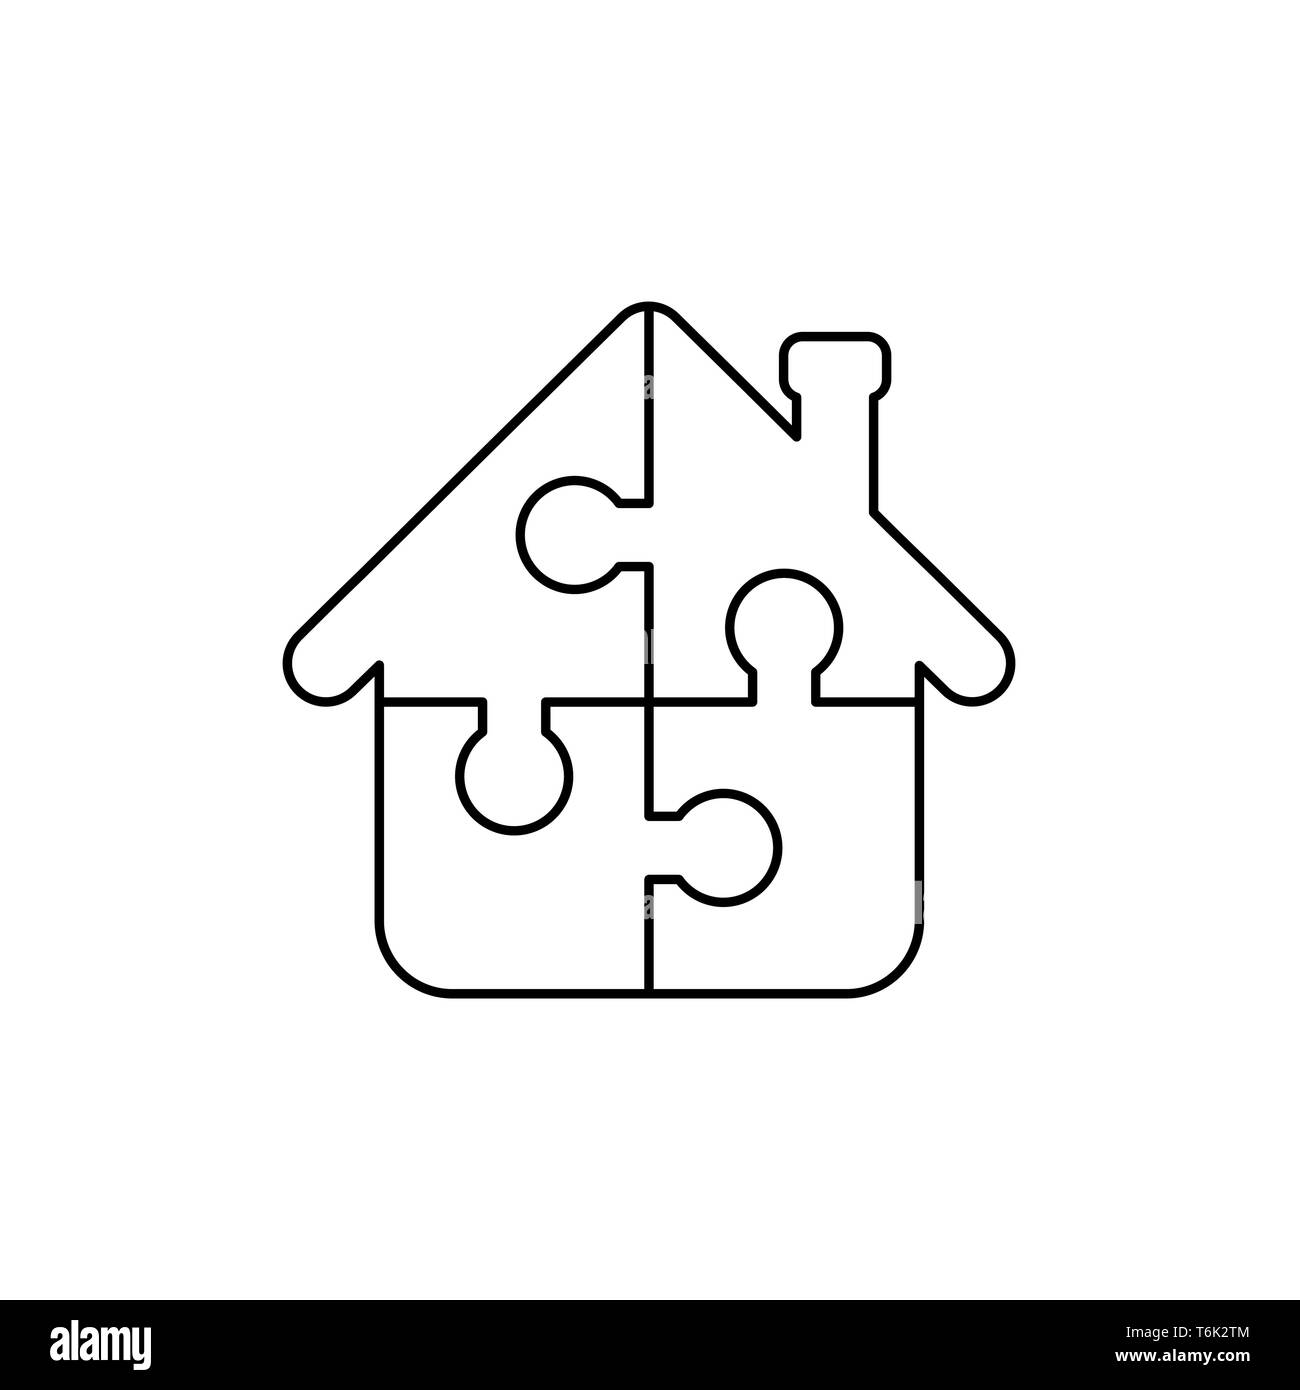 Vector icon concept of house shape four puzzle pieces connected. Black outlines. Stock Vector